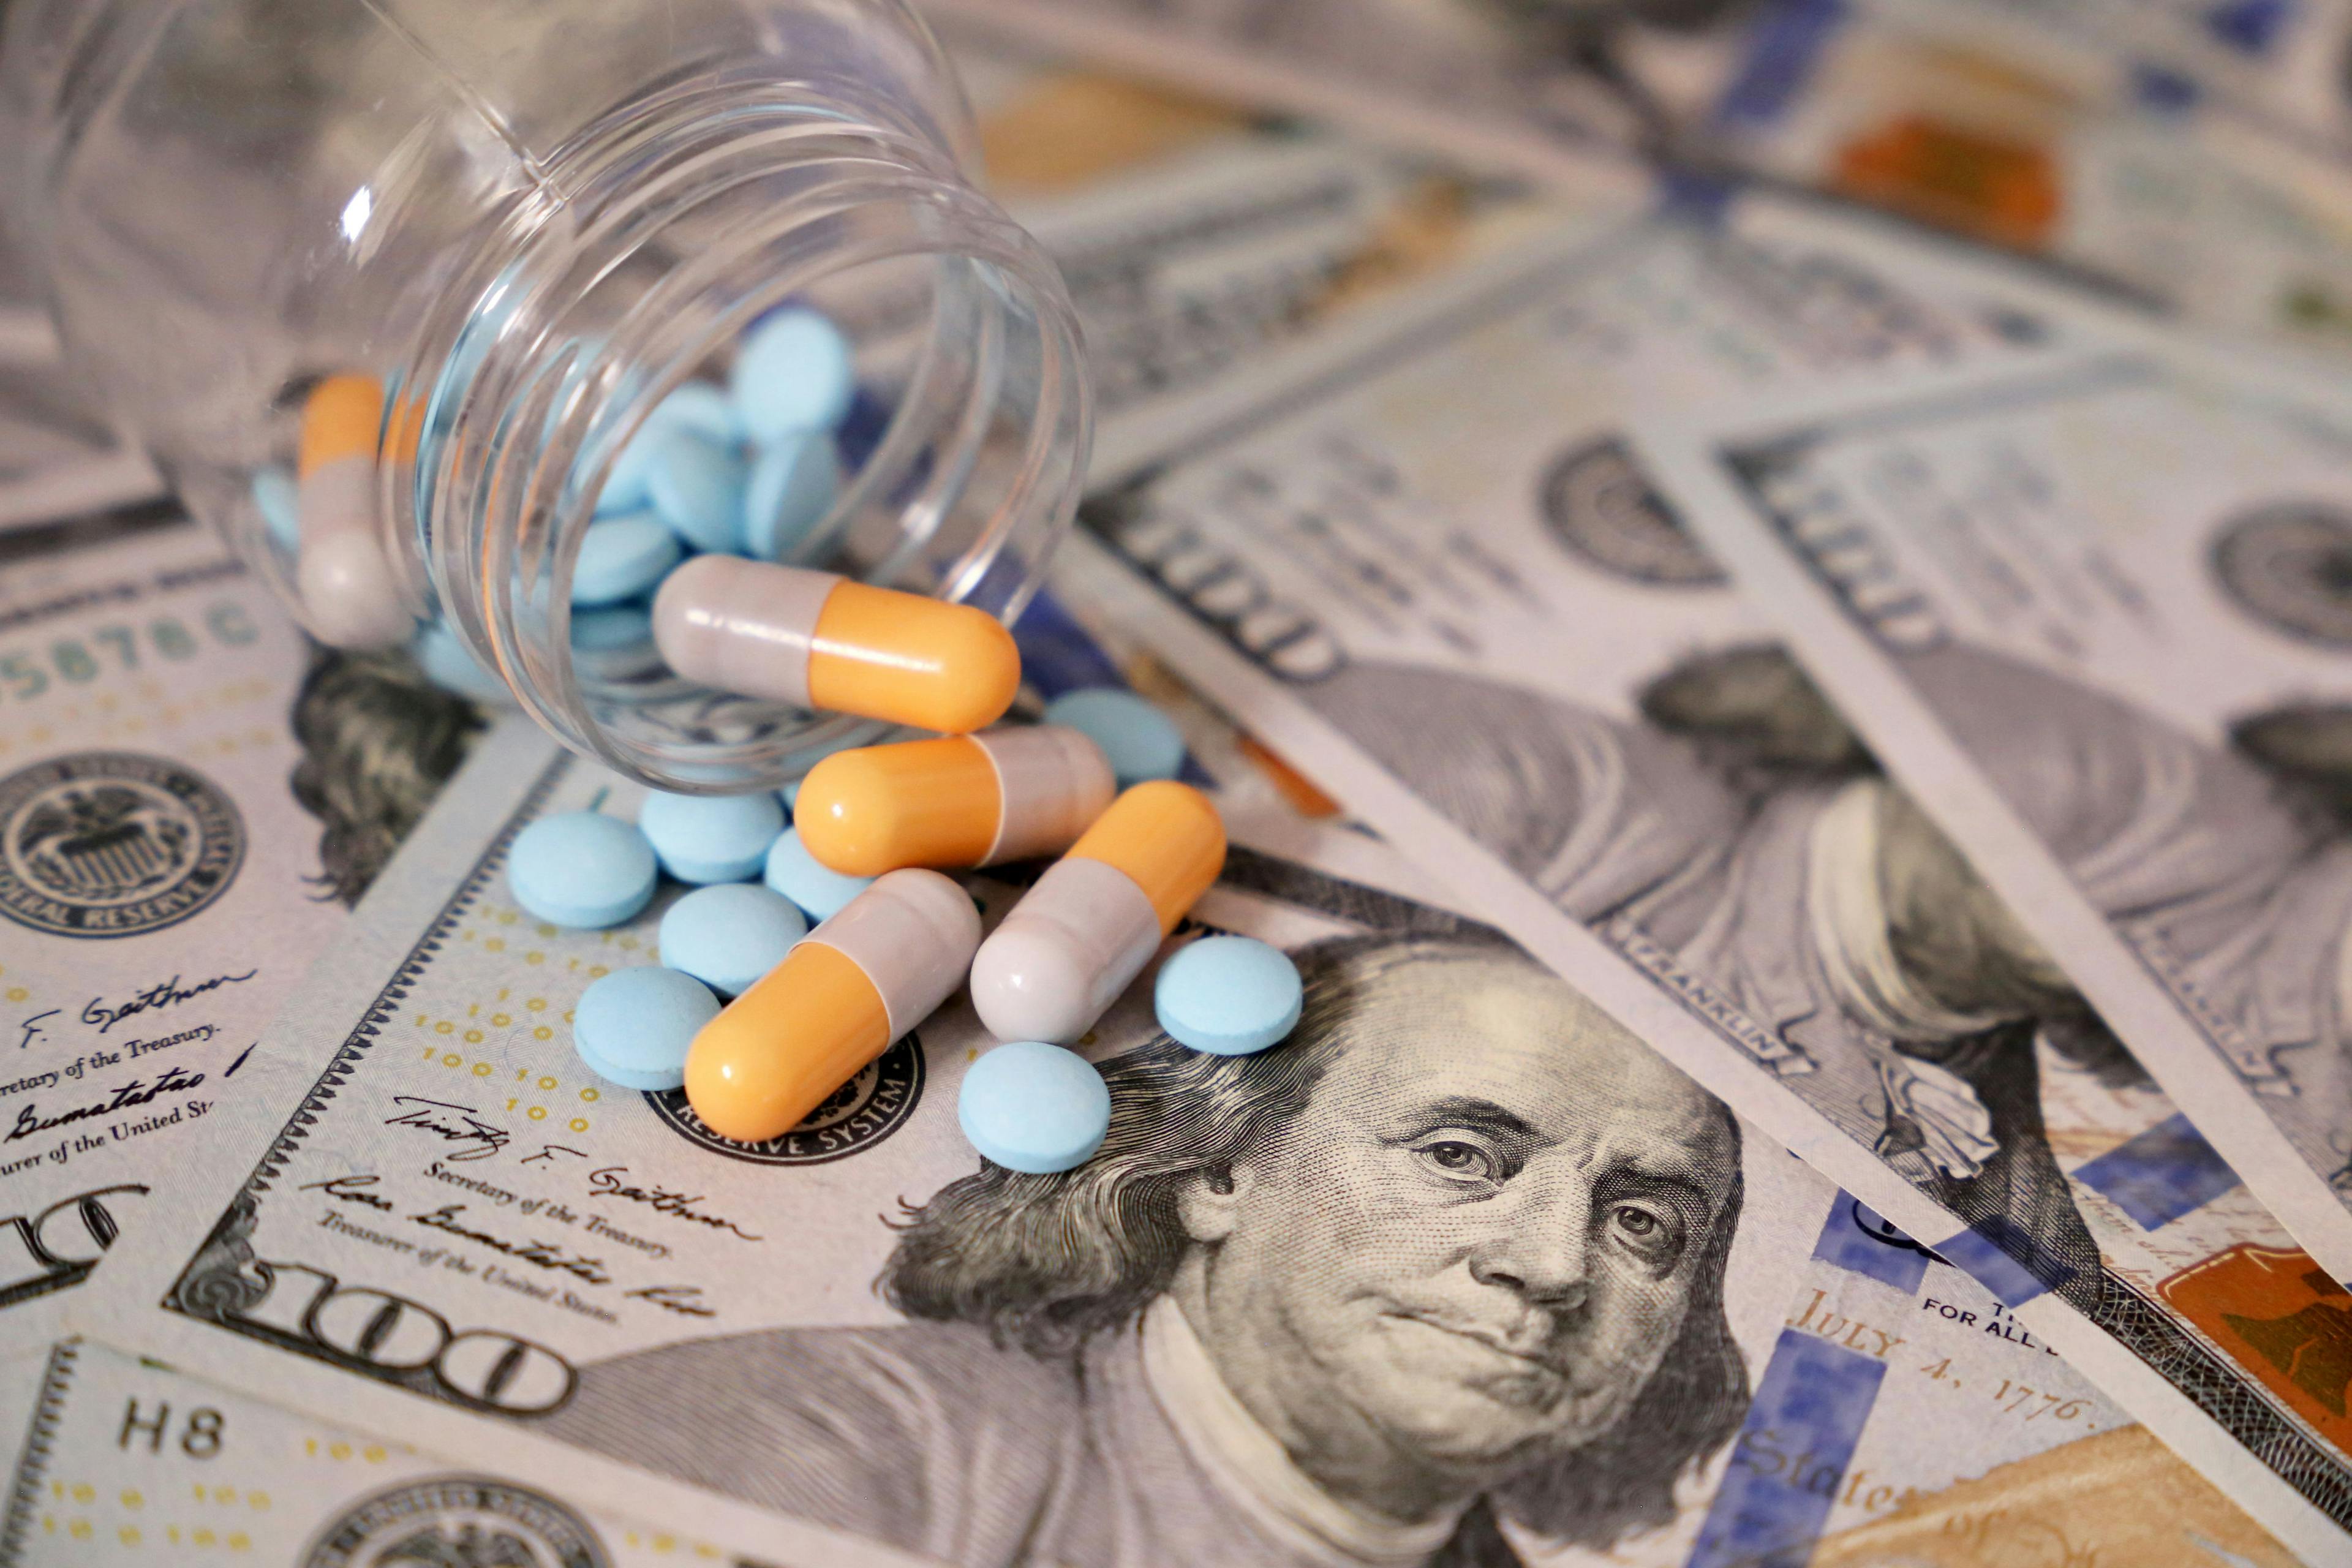 CMS Announces First 10 Drugs To Undergo Price Negotiations Under Inflation Reduction Act